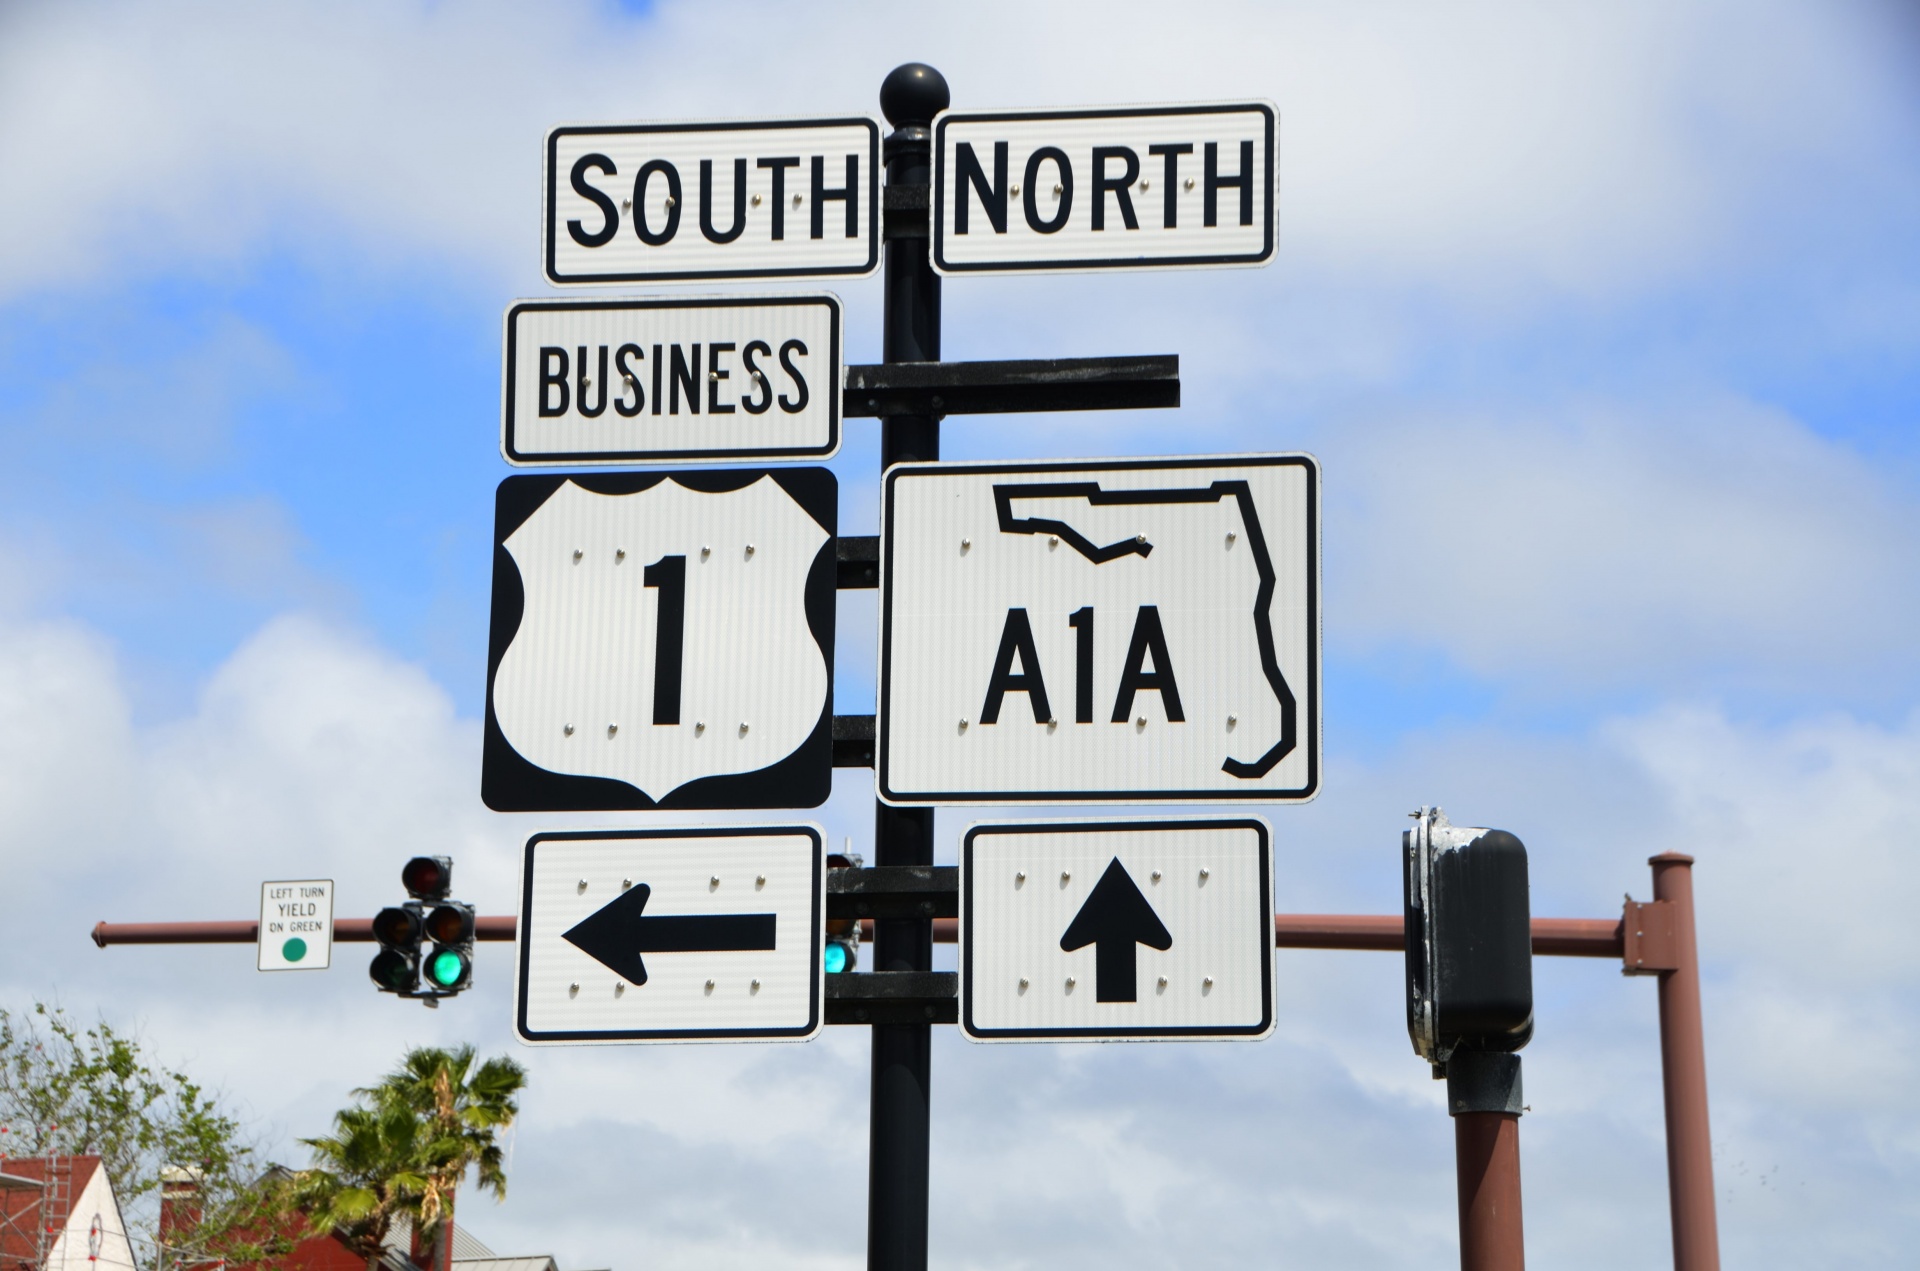 a1a sign direction symbol free photo